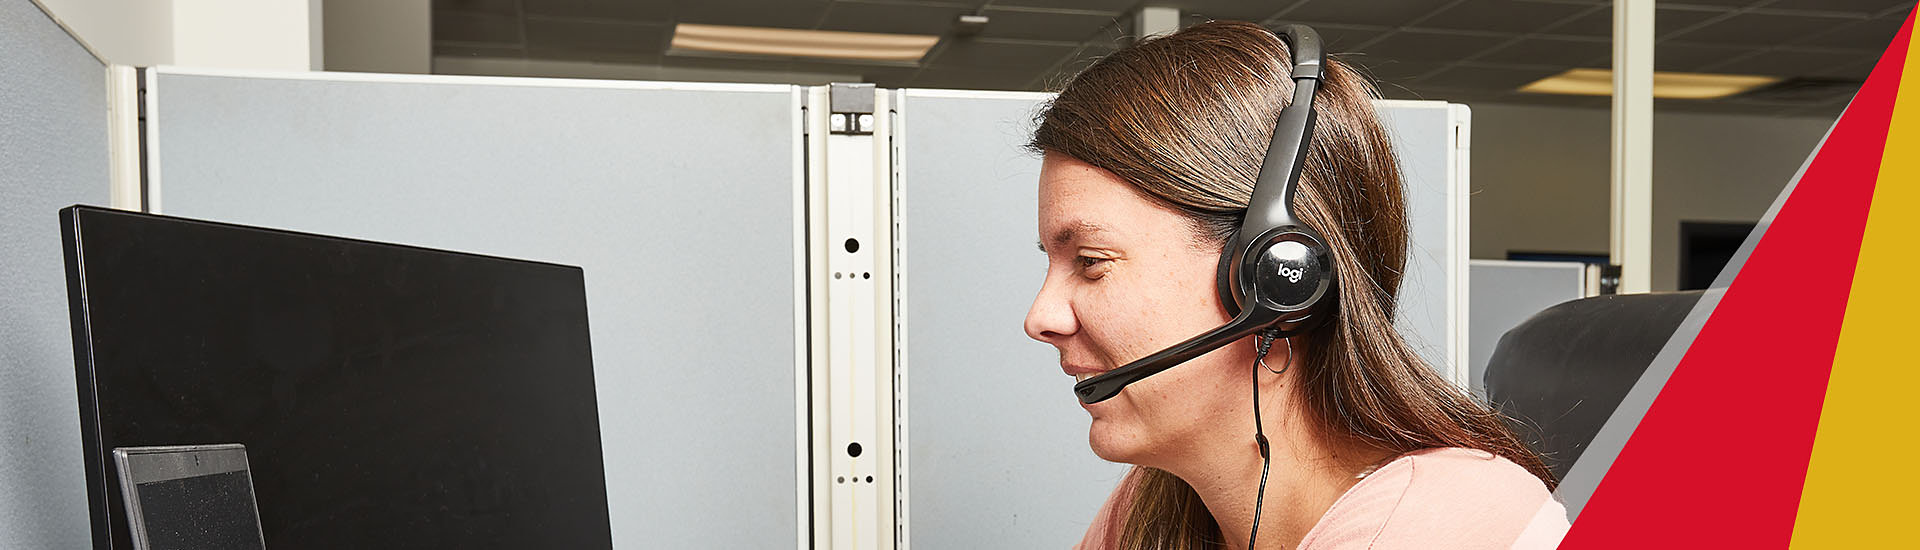 Customer service representative with headset on